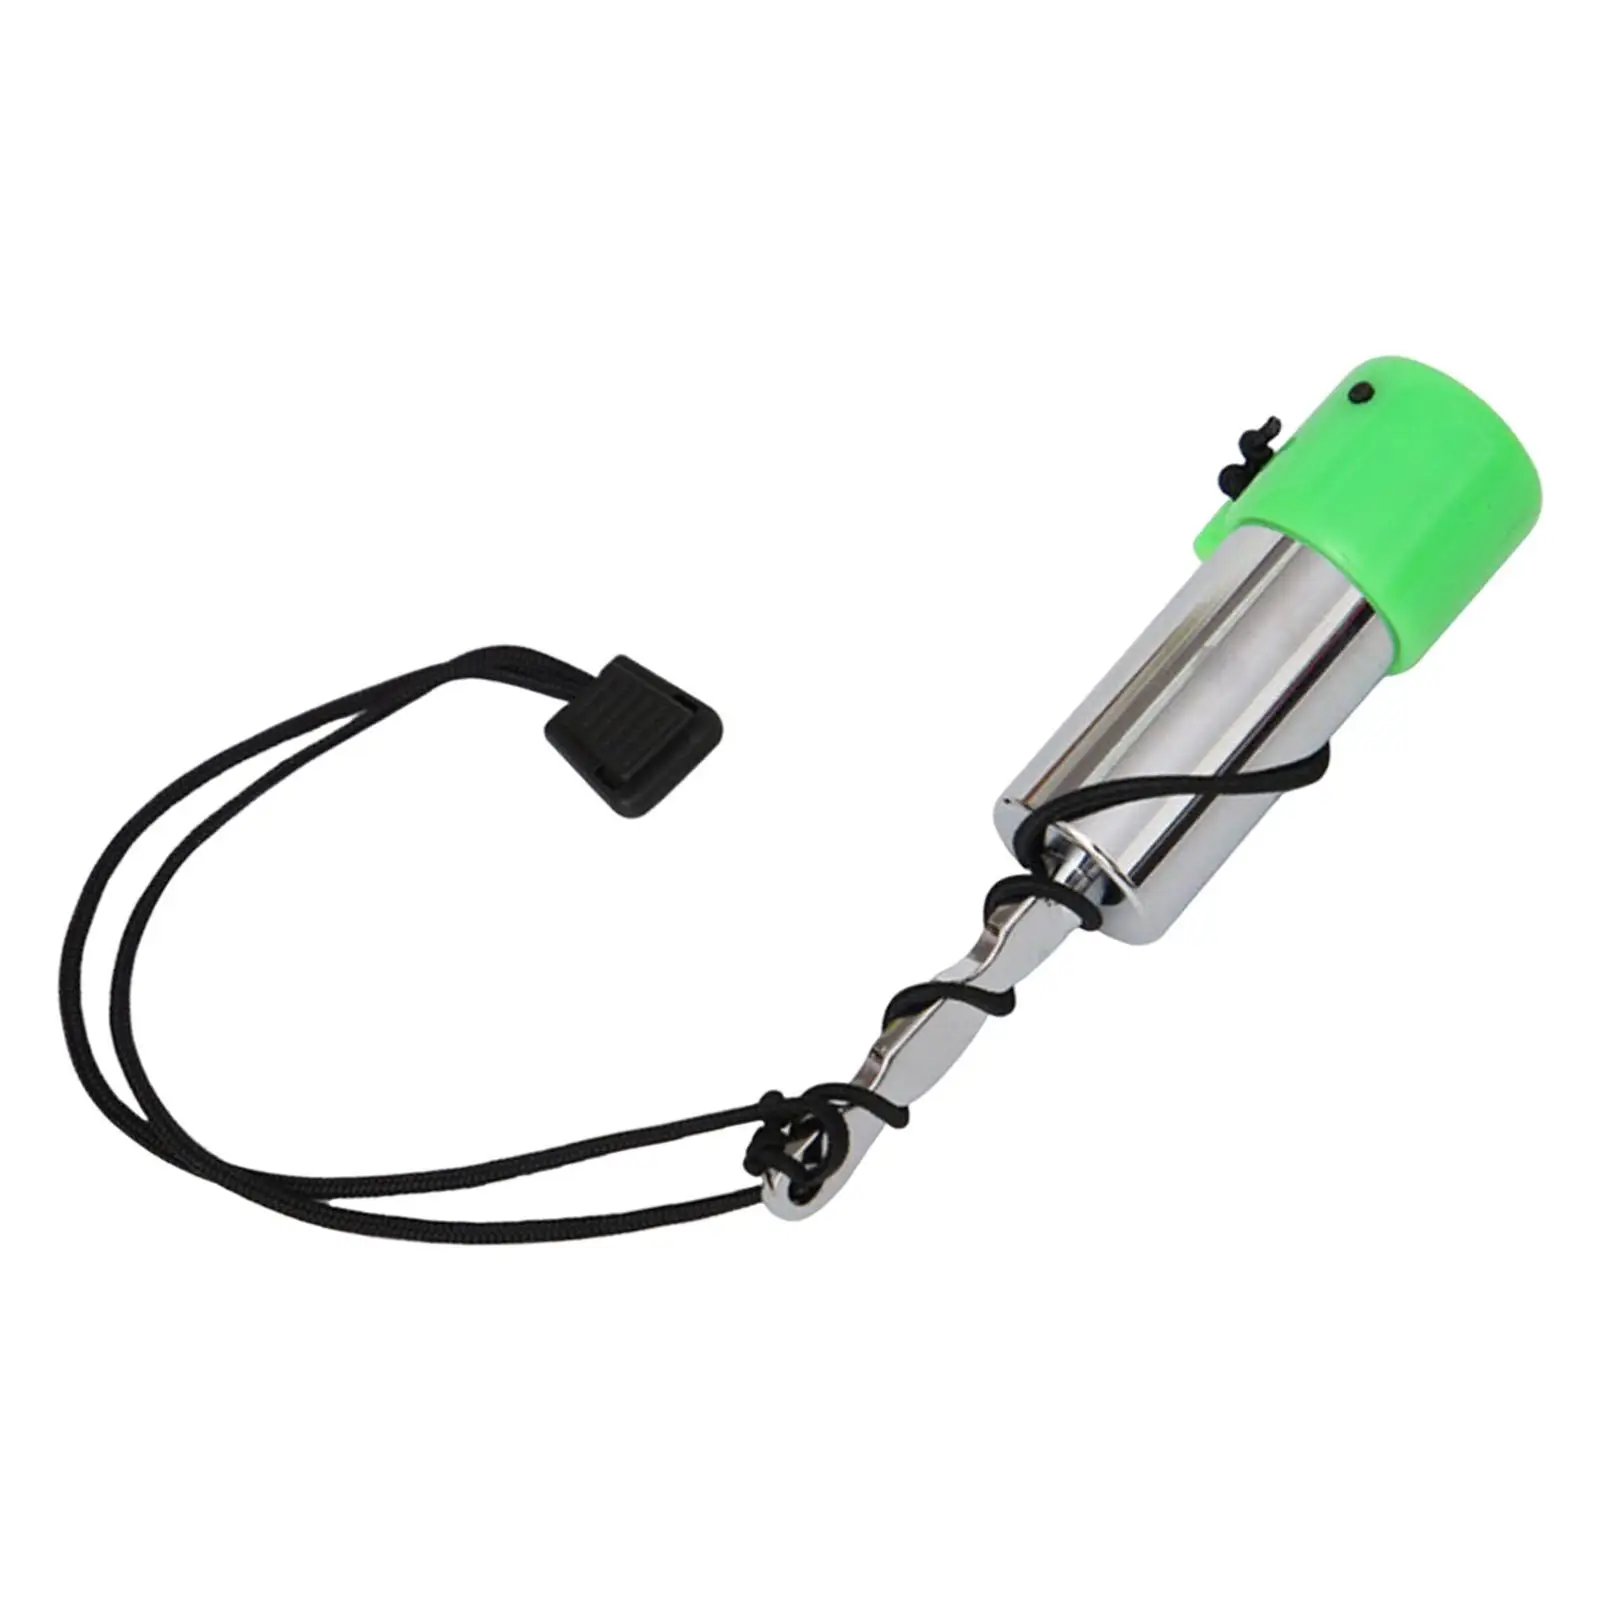 Scuba Rattle Stick Silver with Clip Underwater Shaker Underwater Diving Tool Stainless Loudest Portable Scuba Diving Fittings